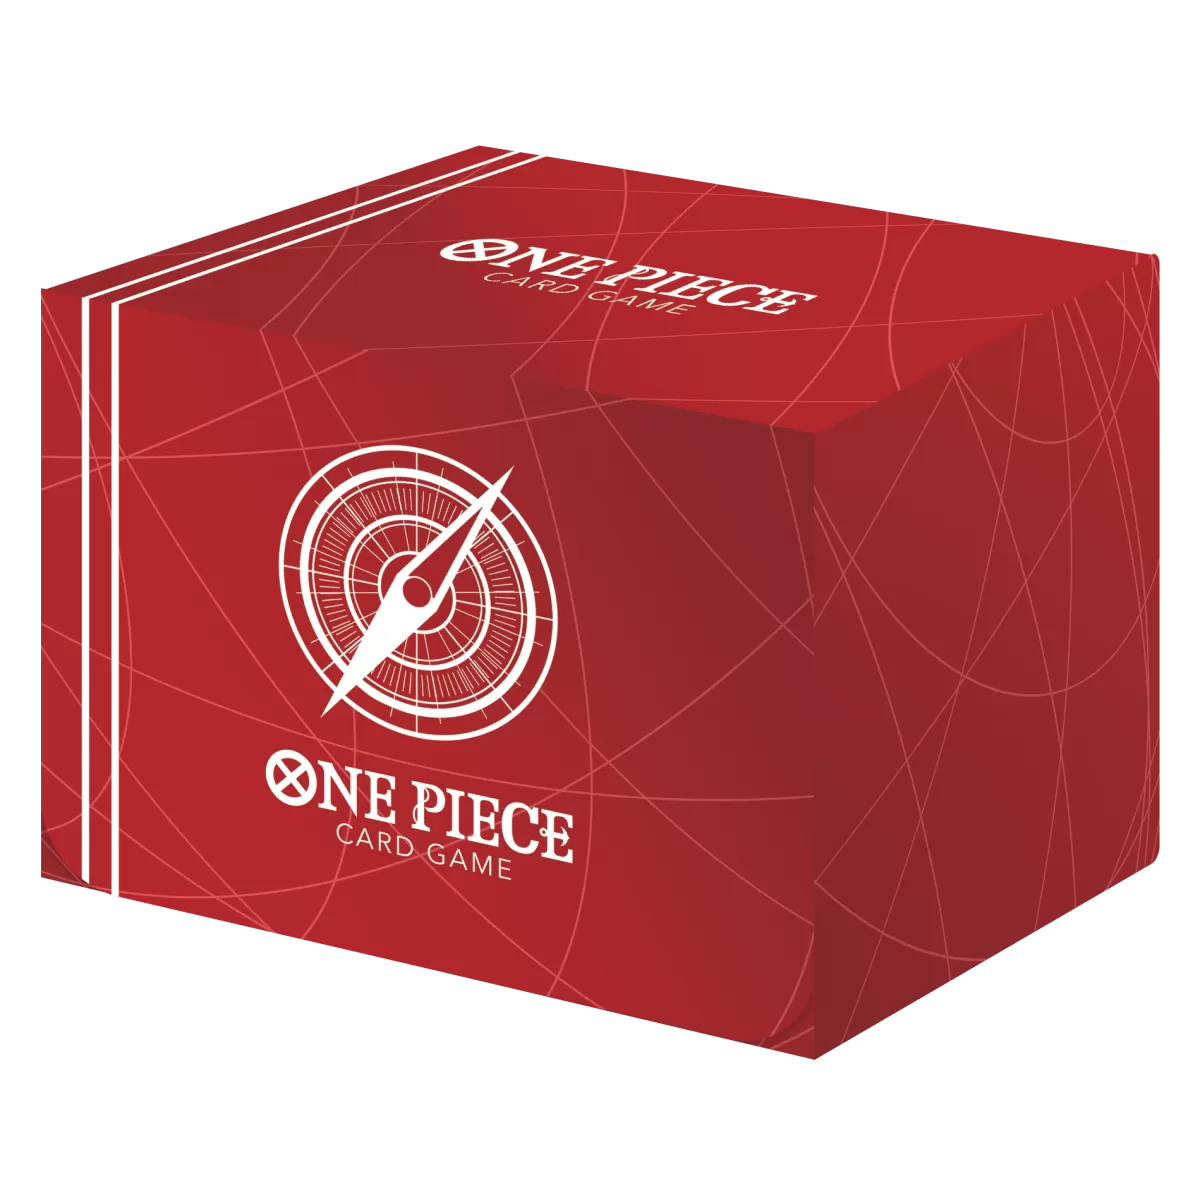 One Piece Card Game Clear Card Case Standard Red Display